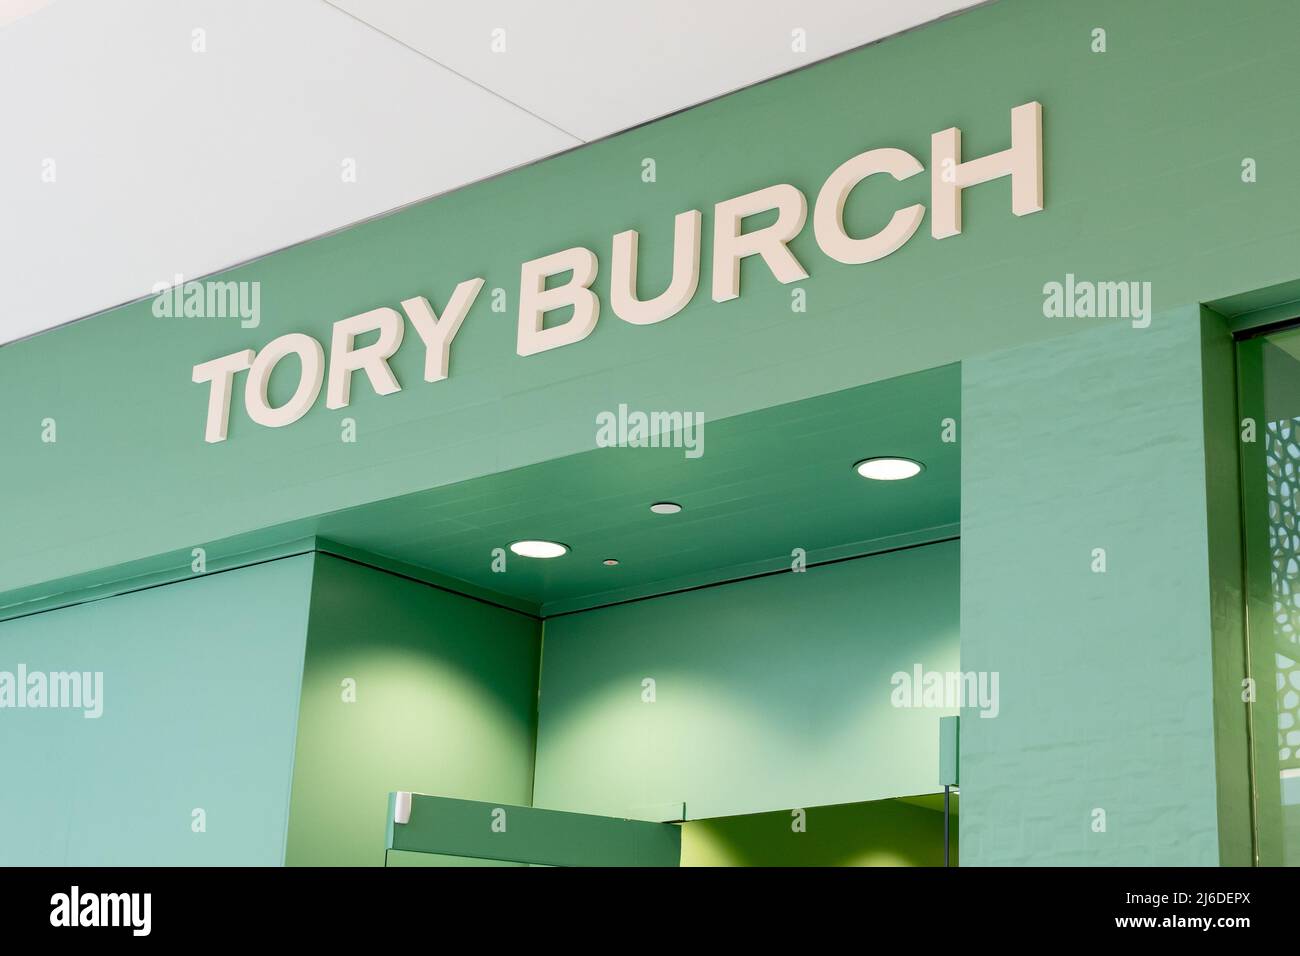 Houston, Texas, USA - February 25, 2022: A Tory Burch sign displayed over the entrance to the store in a shopping mall. Stock Photo